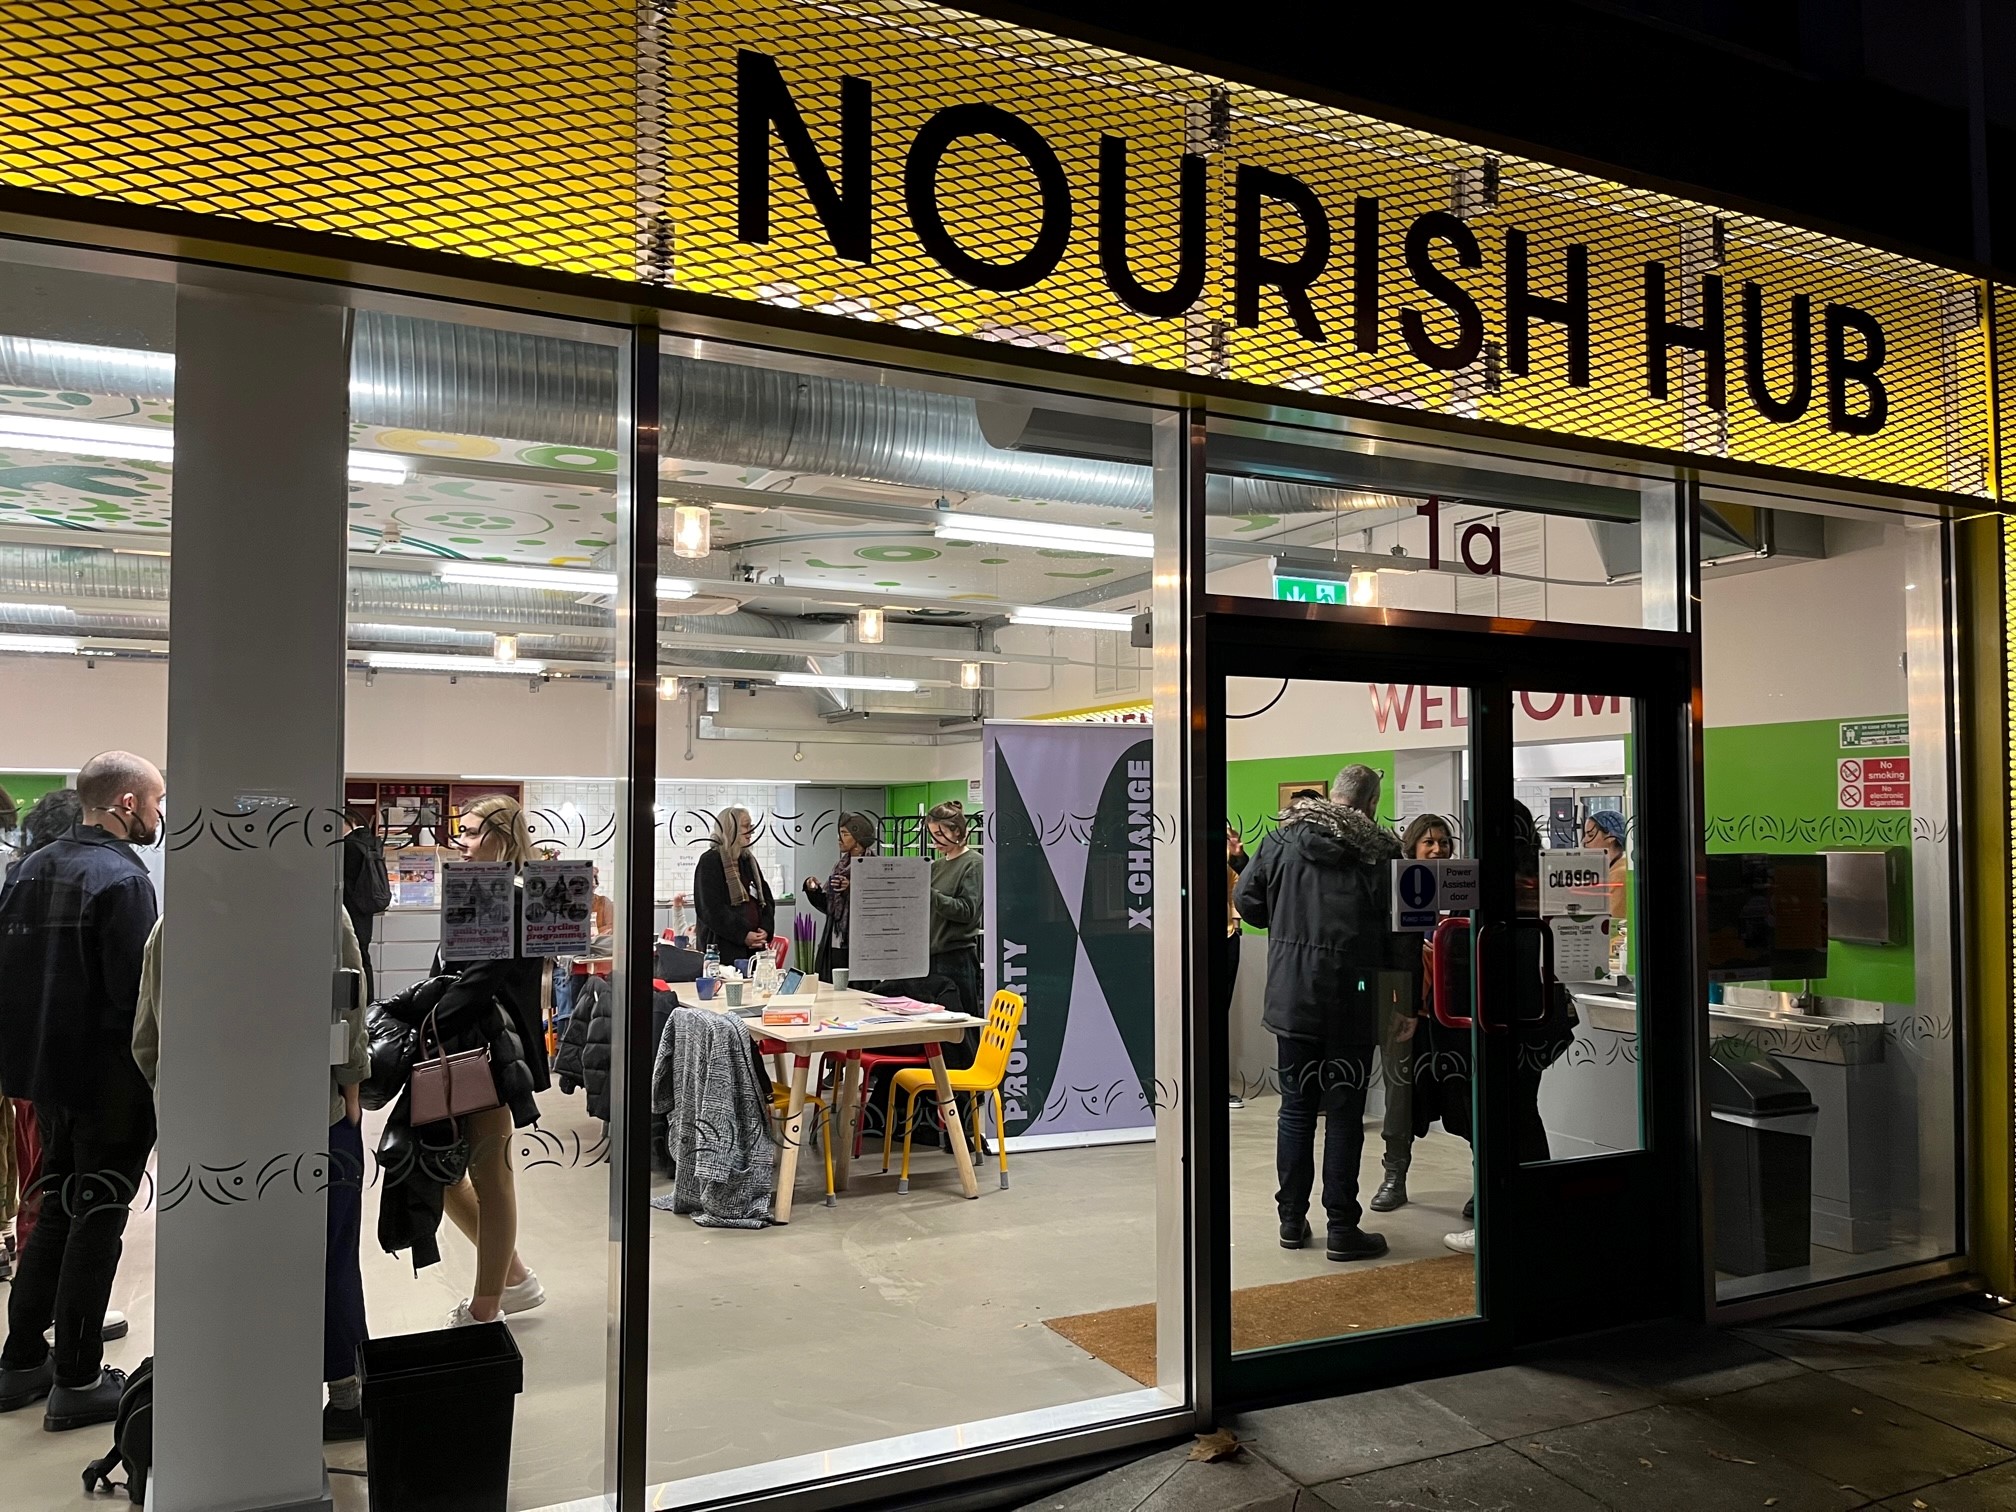 View of Nourish Hub from the outside looking in at night.